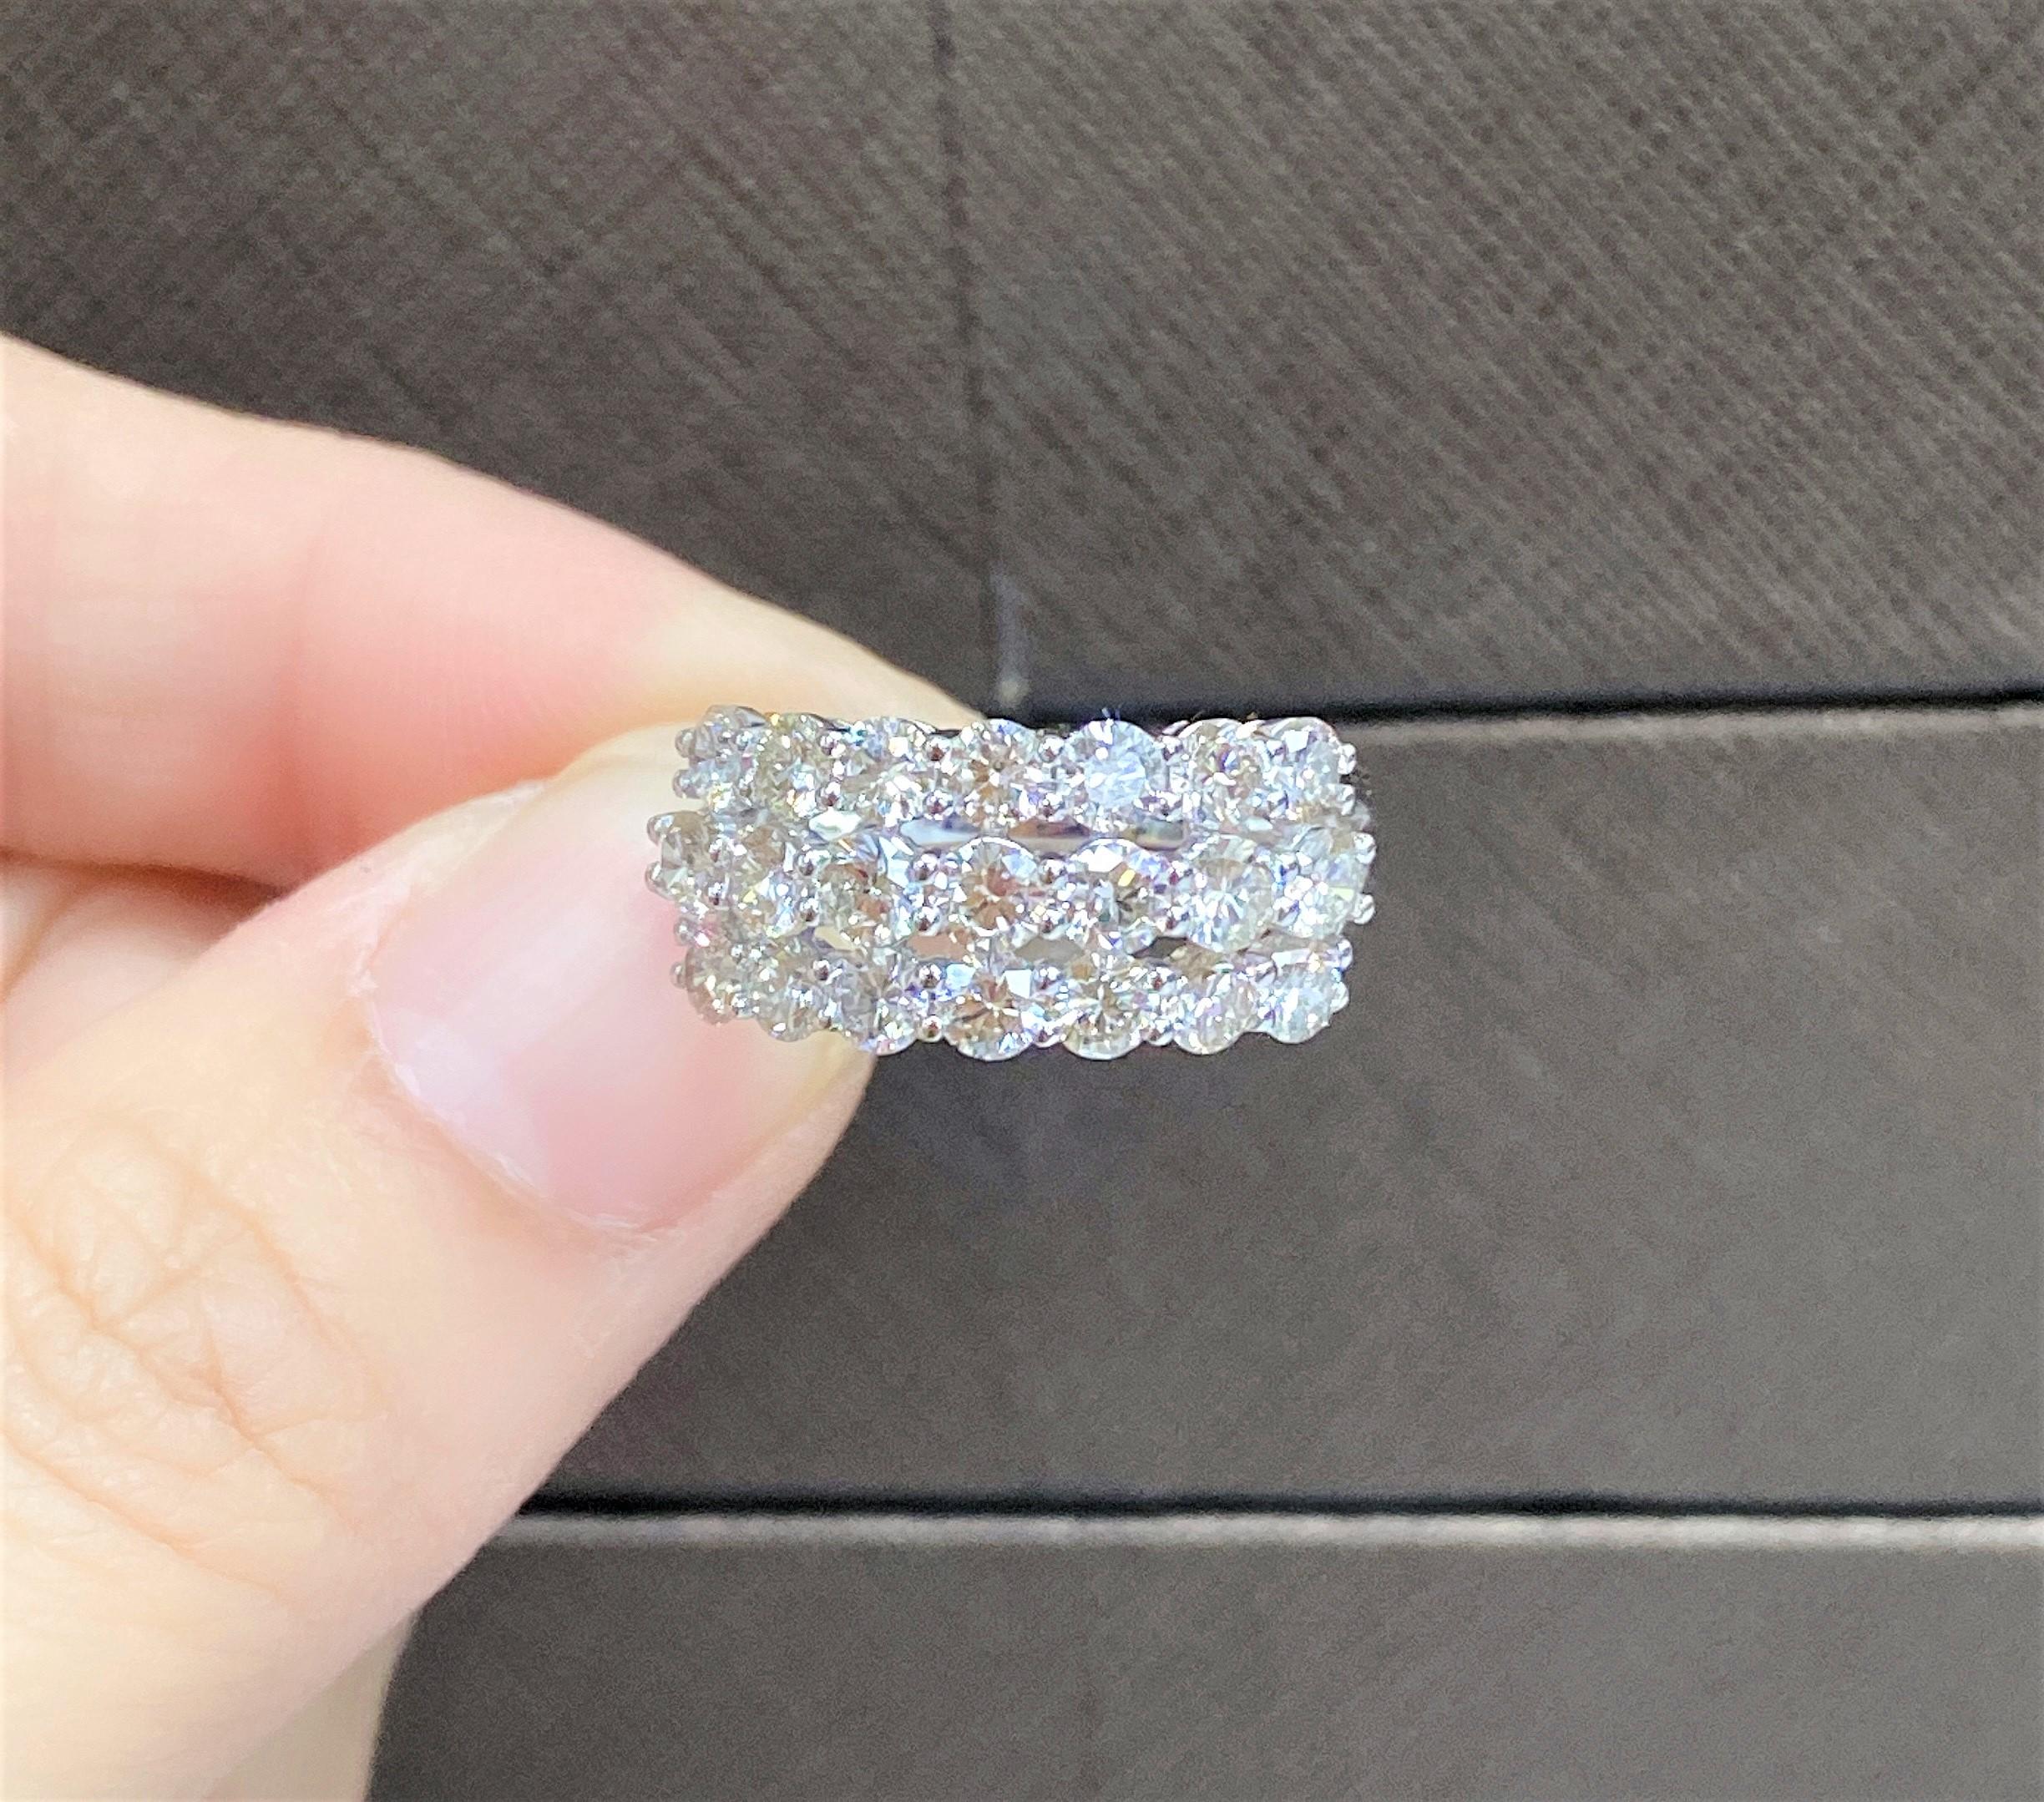 The Following Item we are offering is a Rare Important Radiant 18KT GOLD LARGE THREE ROW ROUND CUT DIAMOND RING. Ring is comprised with Gorgeous Finely Set Round Cut Diamonds Framed with Gorgeous Glittering Round Diamonds. T.C.W. approx 2CTS!!! This